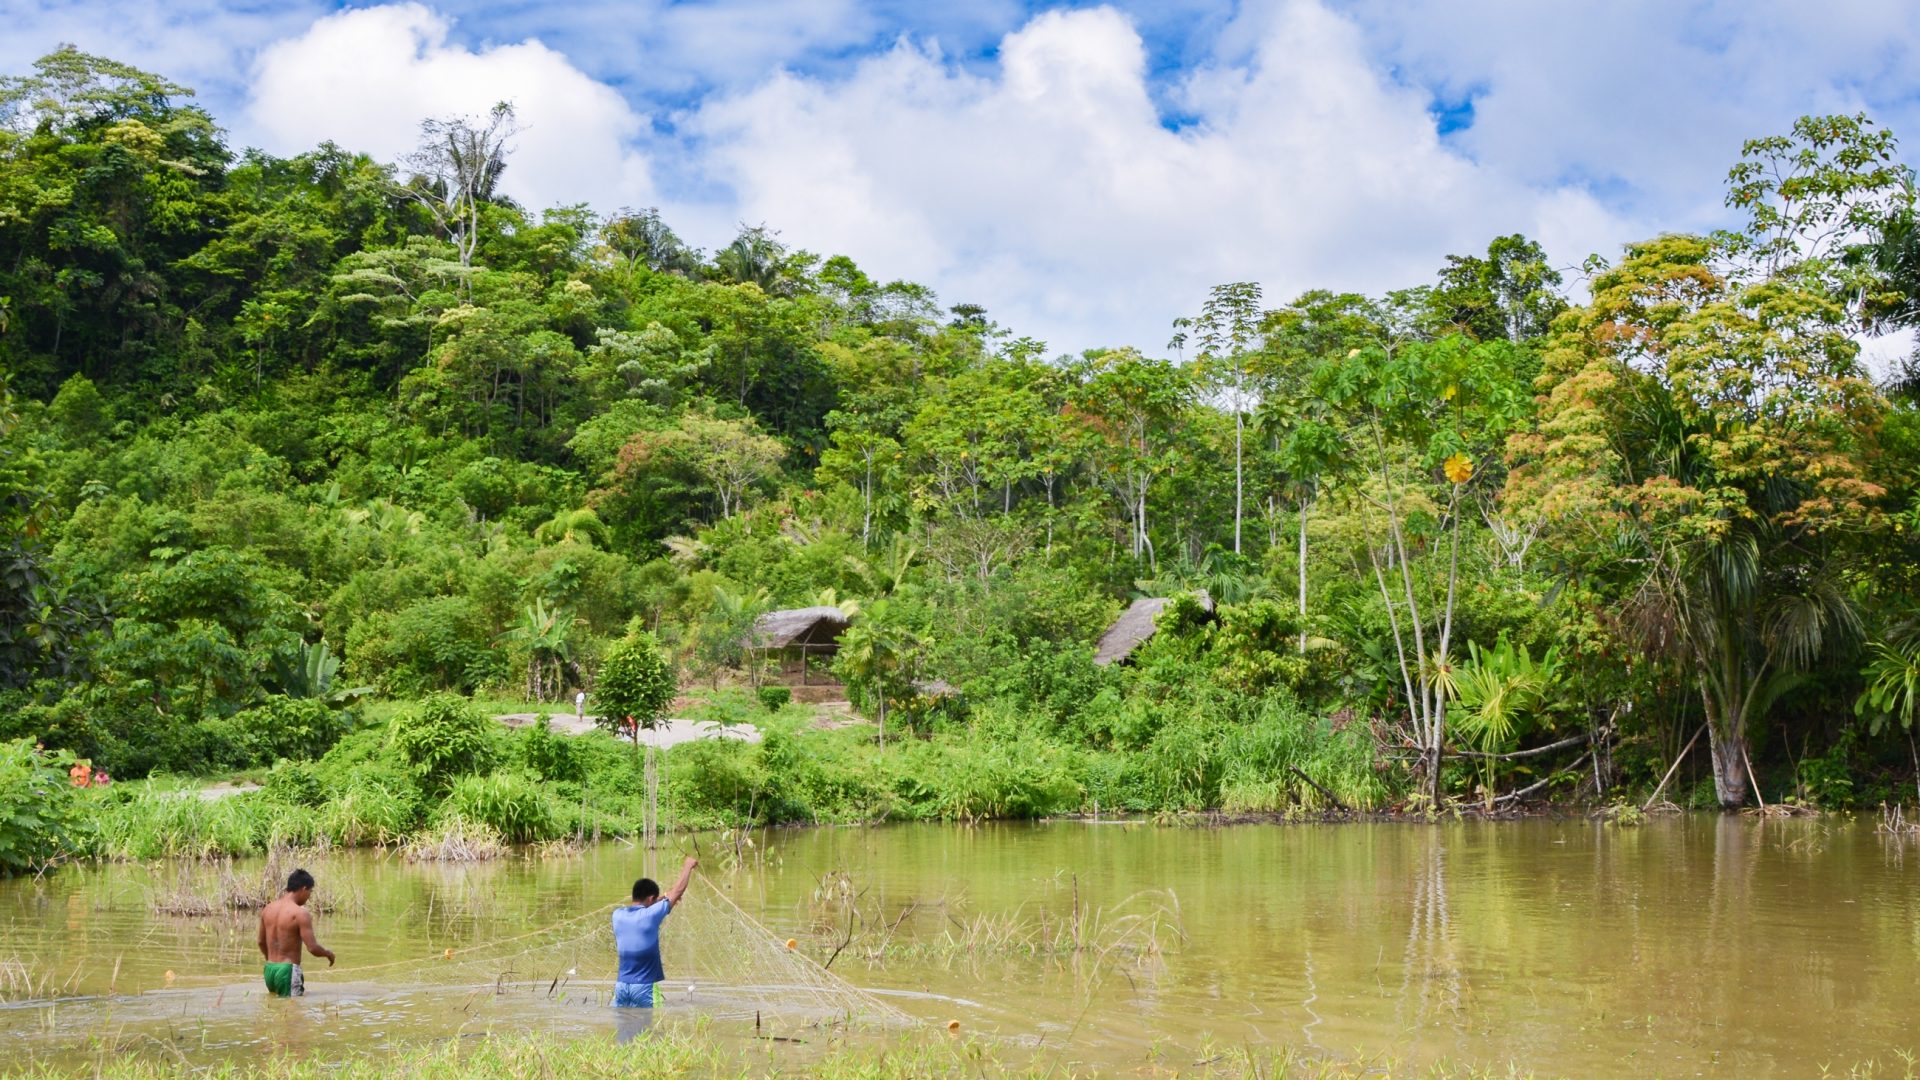 Two men are settting nets in a fishpond surrounded by forest.